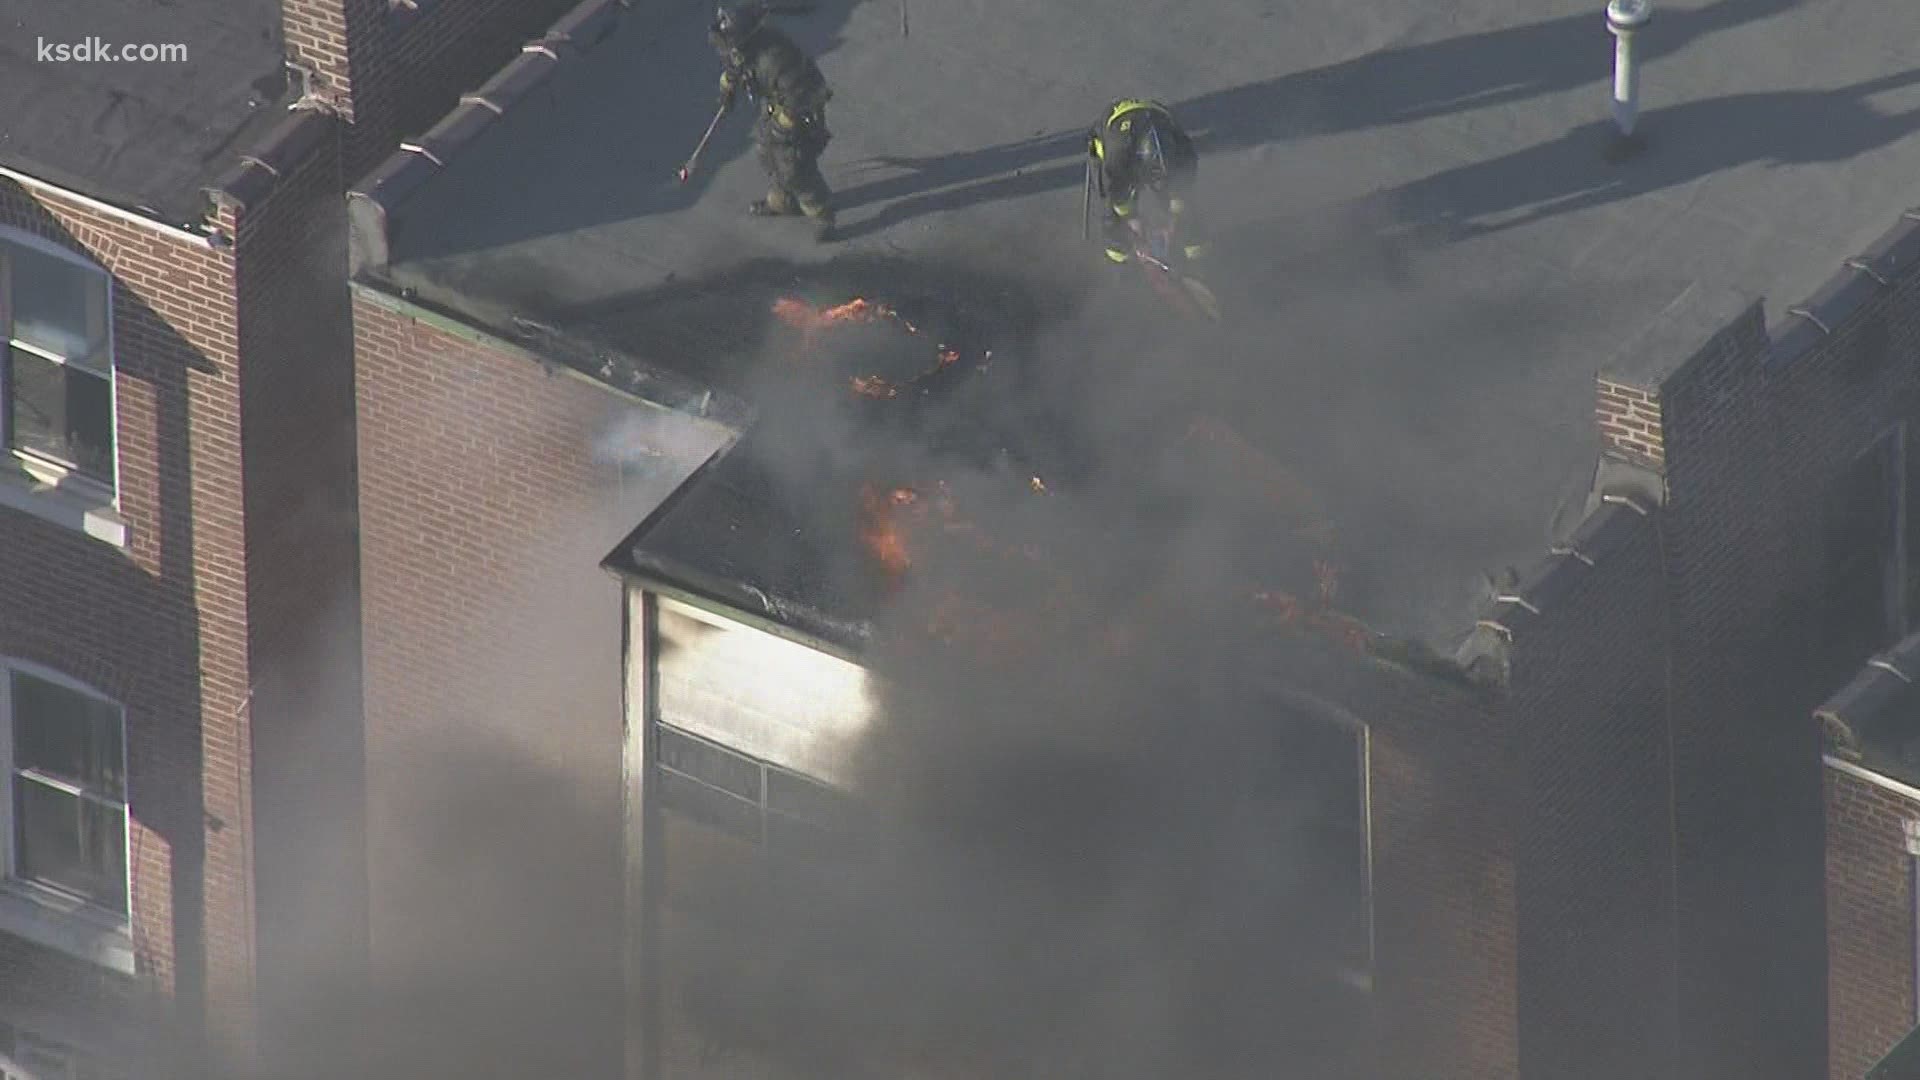 You can see flames and smoke coming from the building near Fairground Park